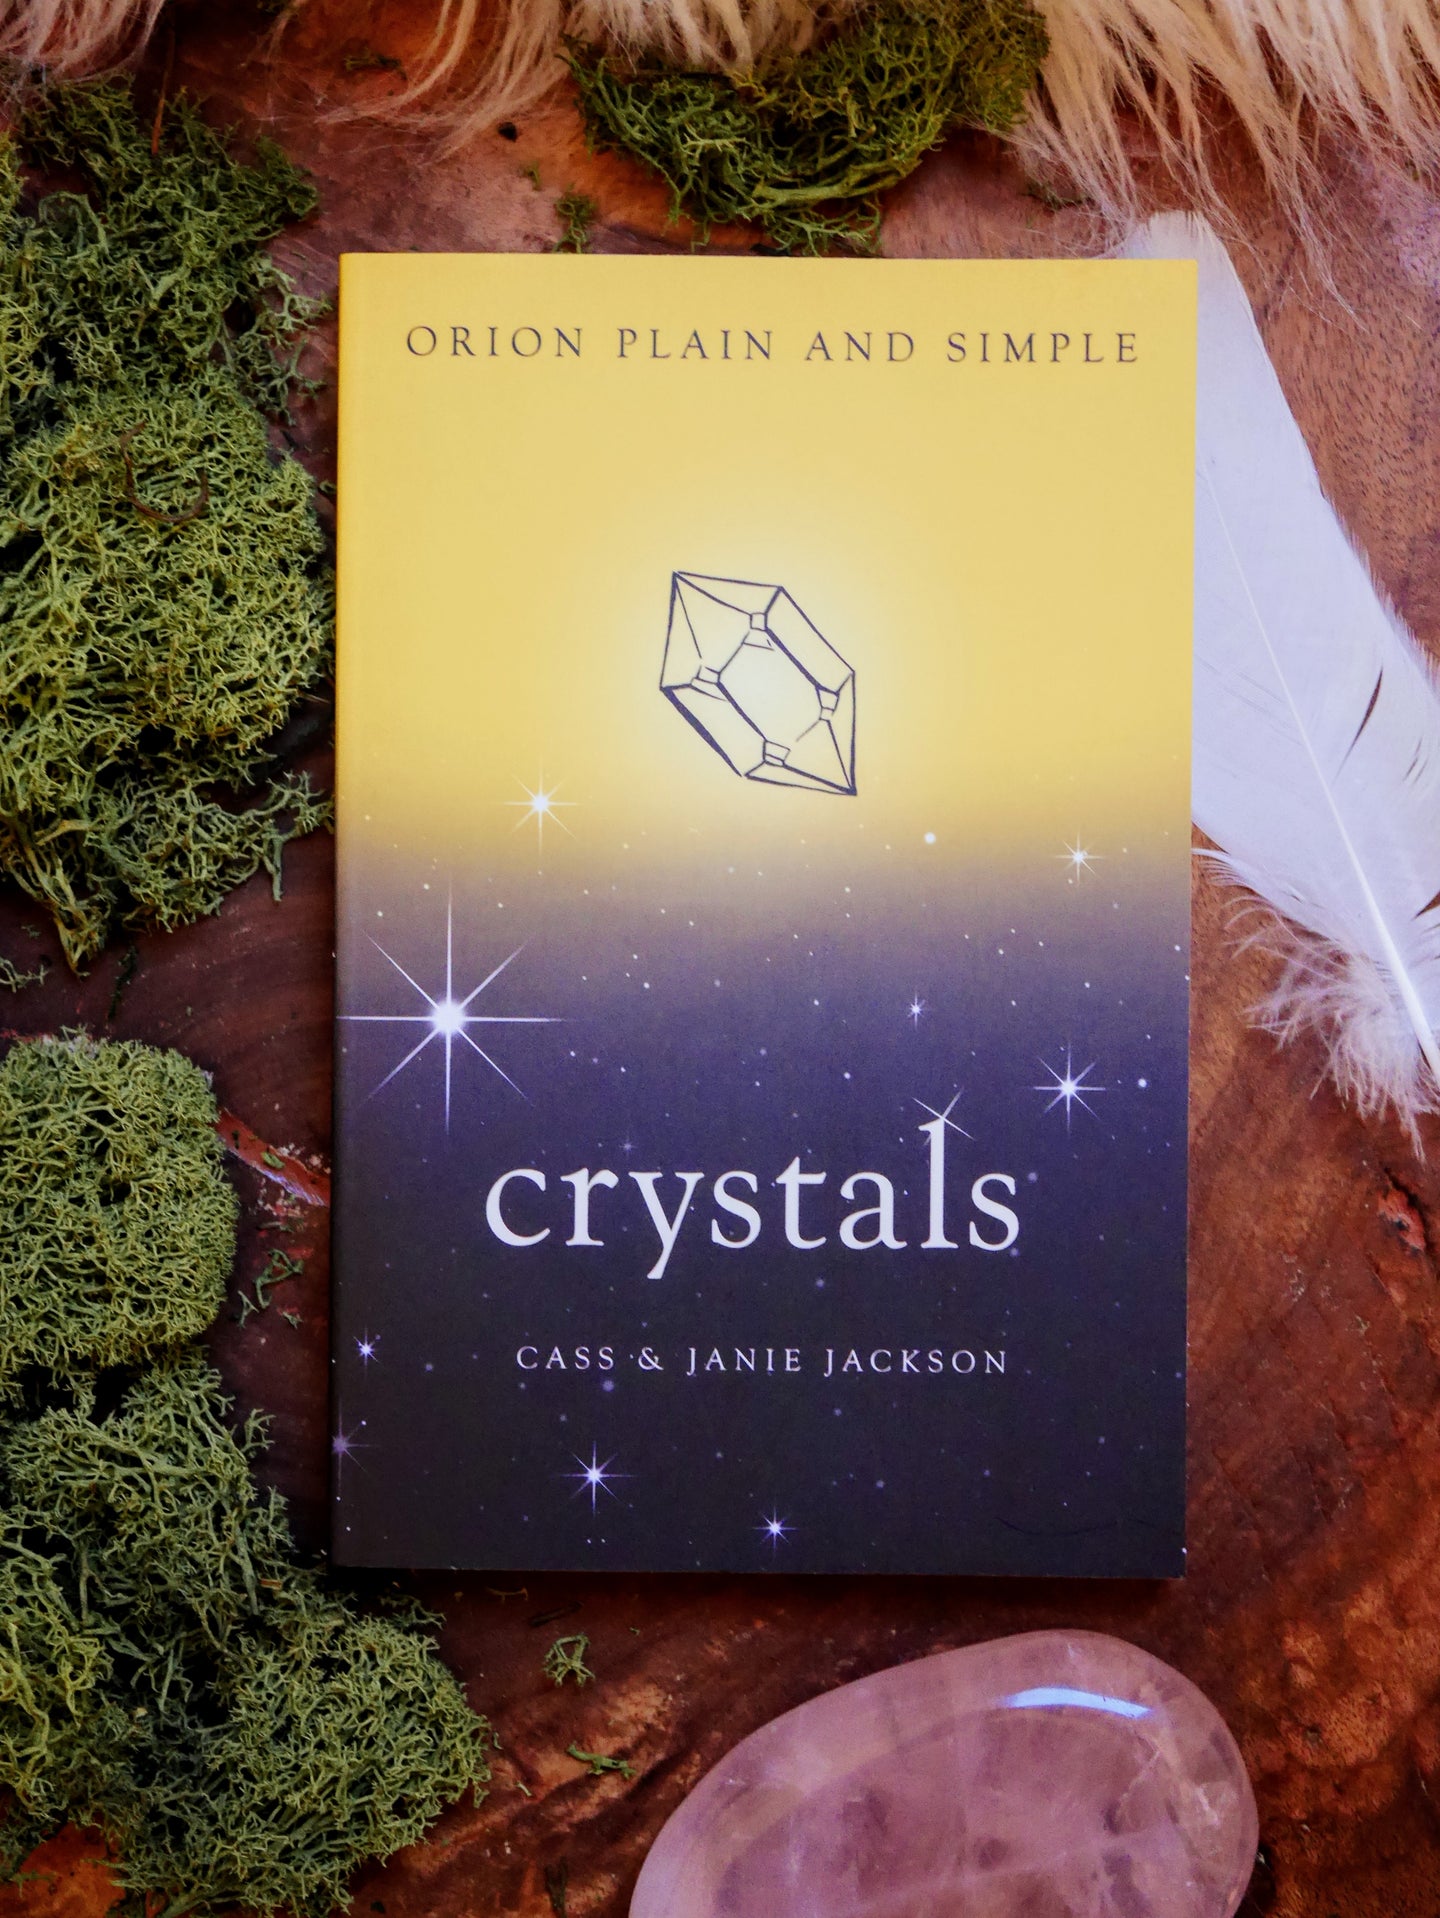 Crystals, Orion plain and simple